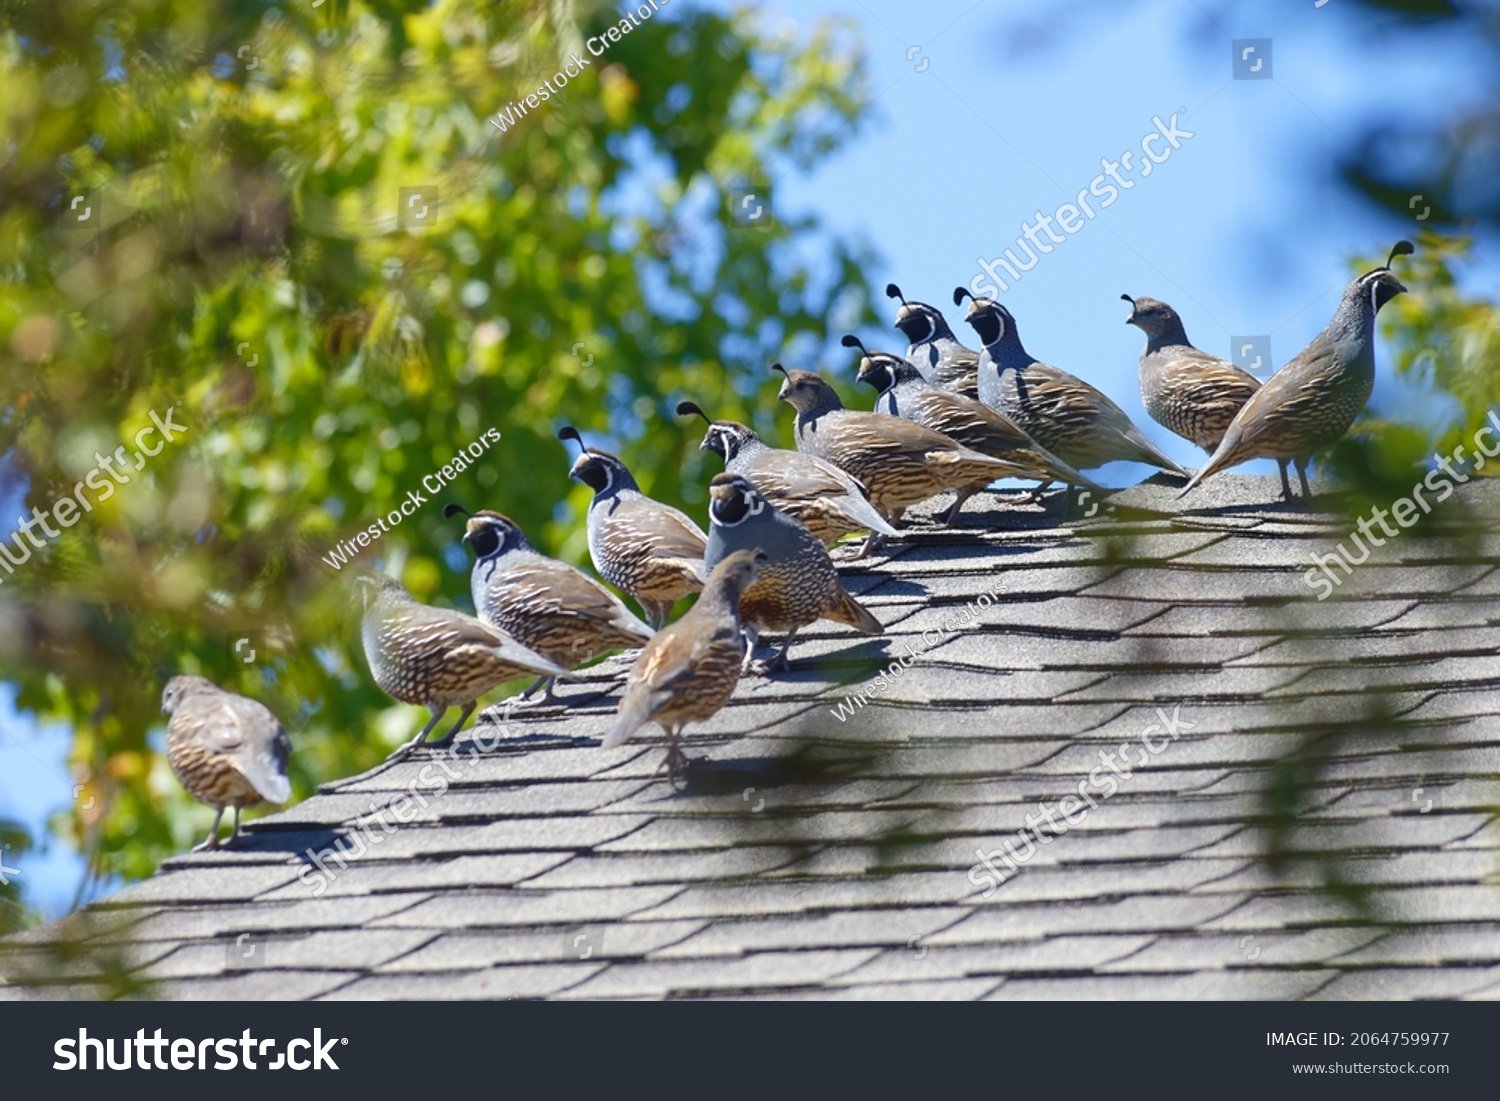 A covey of crested quails perched on a roof in San Luis Obispo, California, USA #2064759977